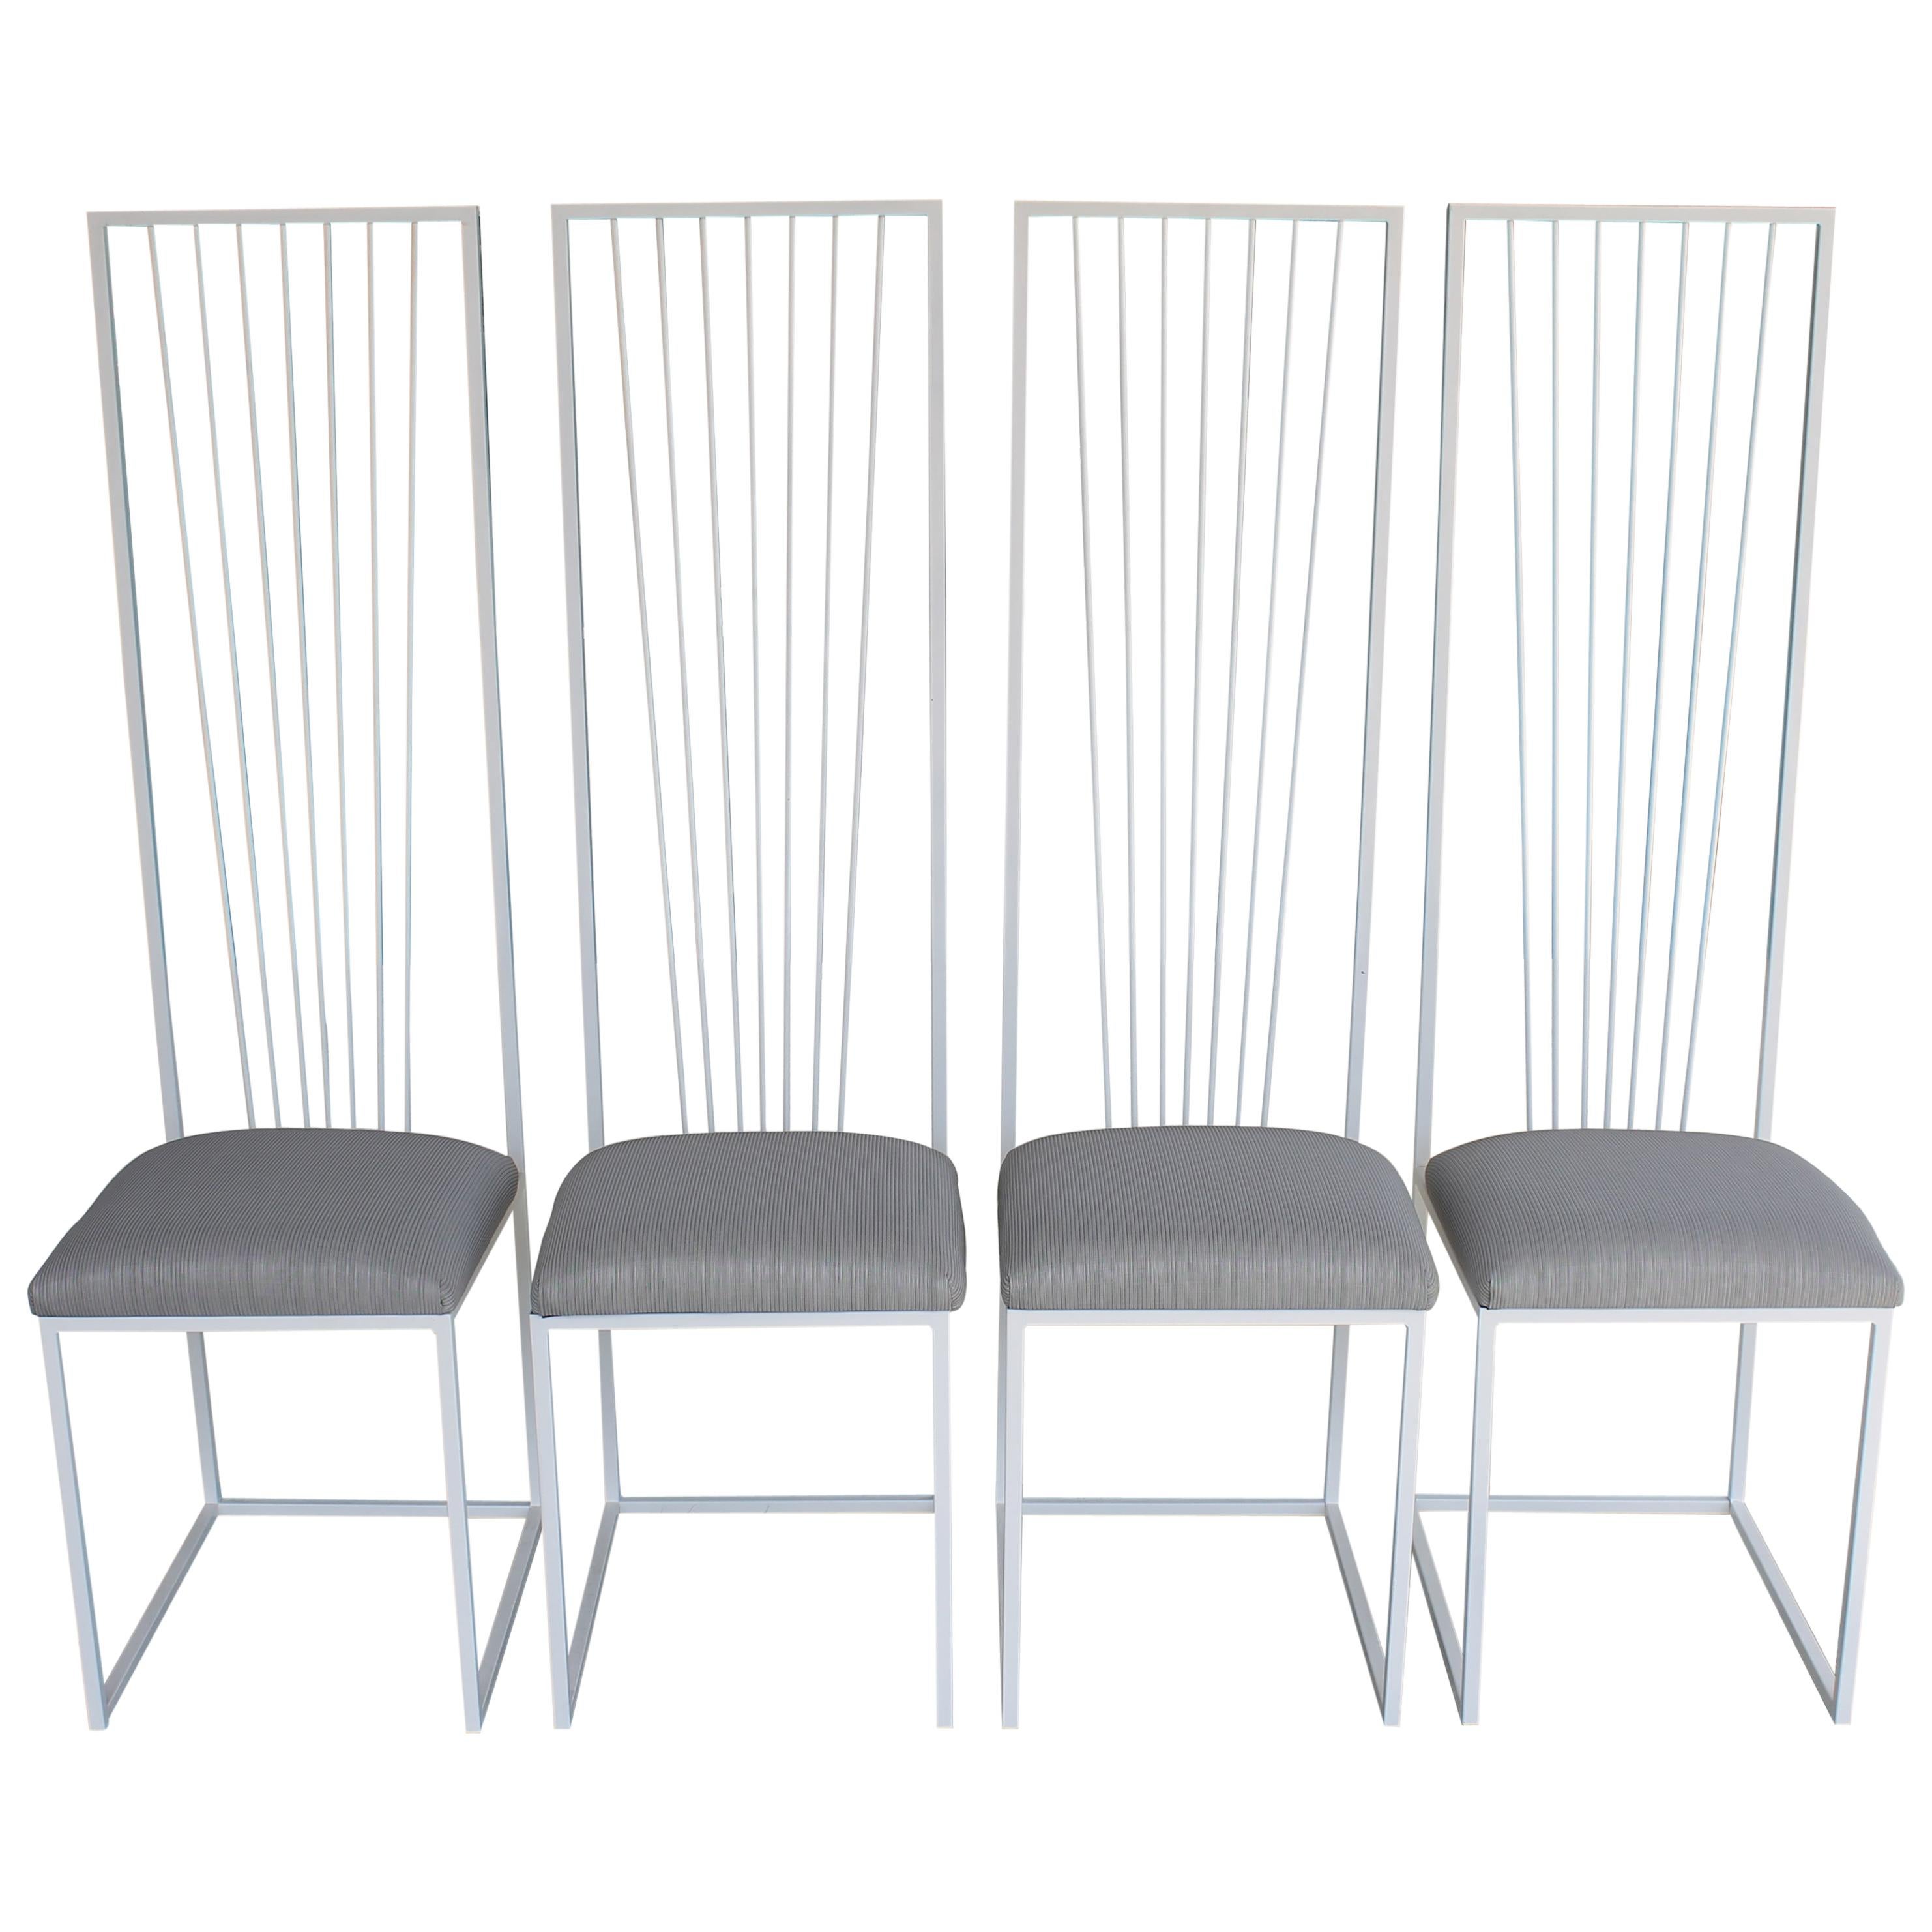 Four Sculptural High-Back Steel Chairs For Sale